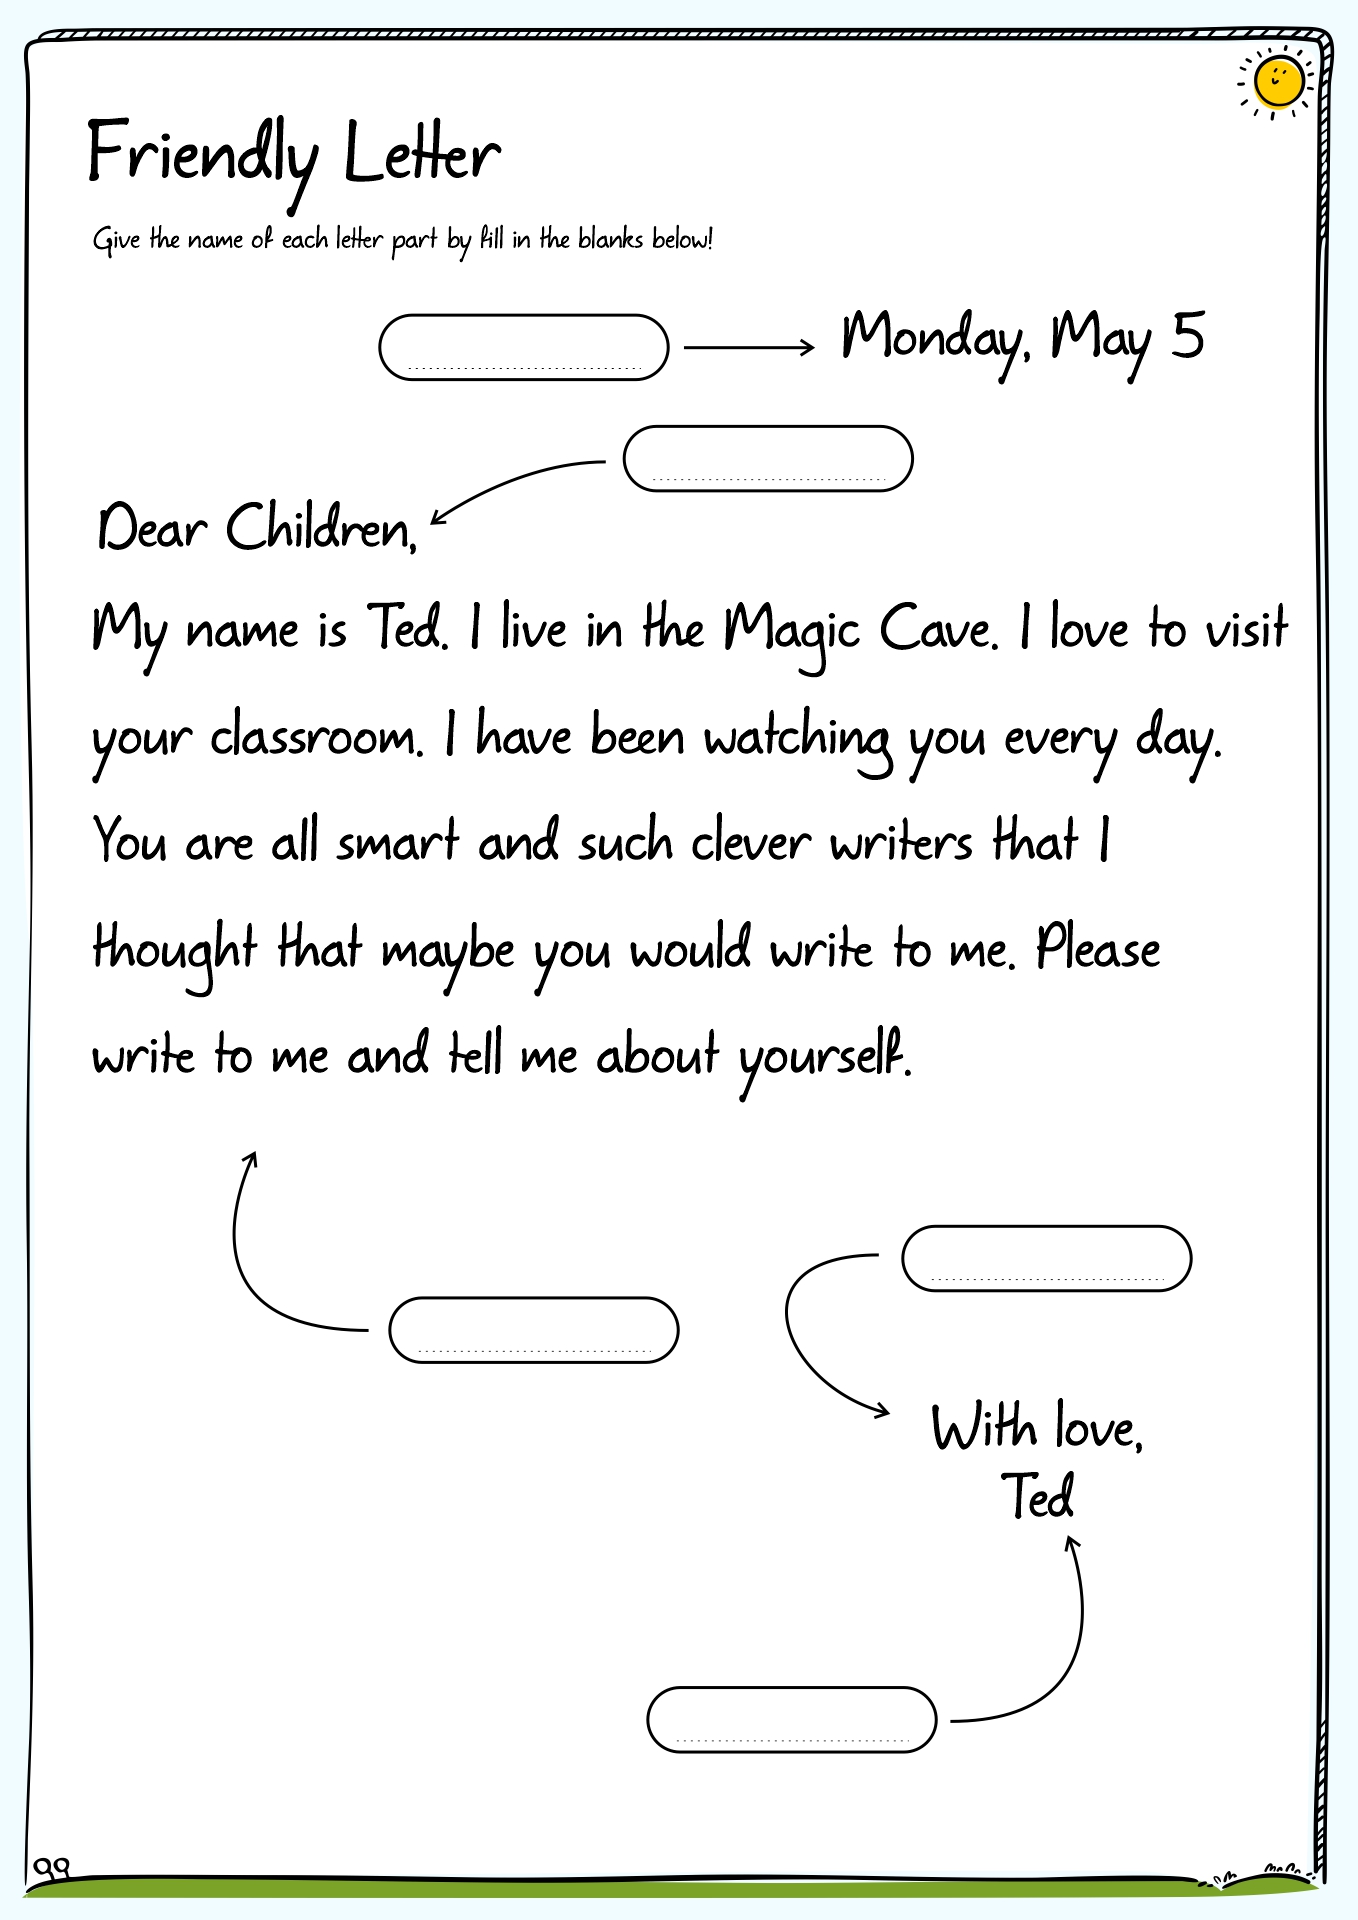 Writing Friendly Letters 2nd Grade